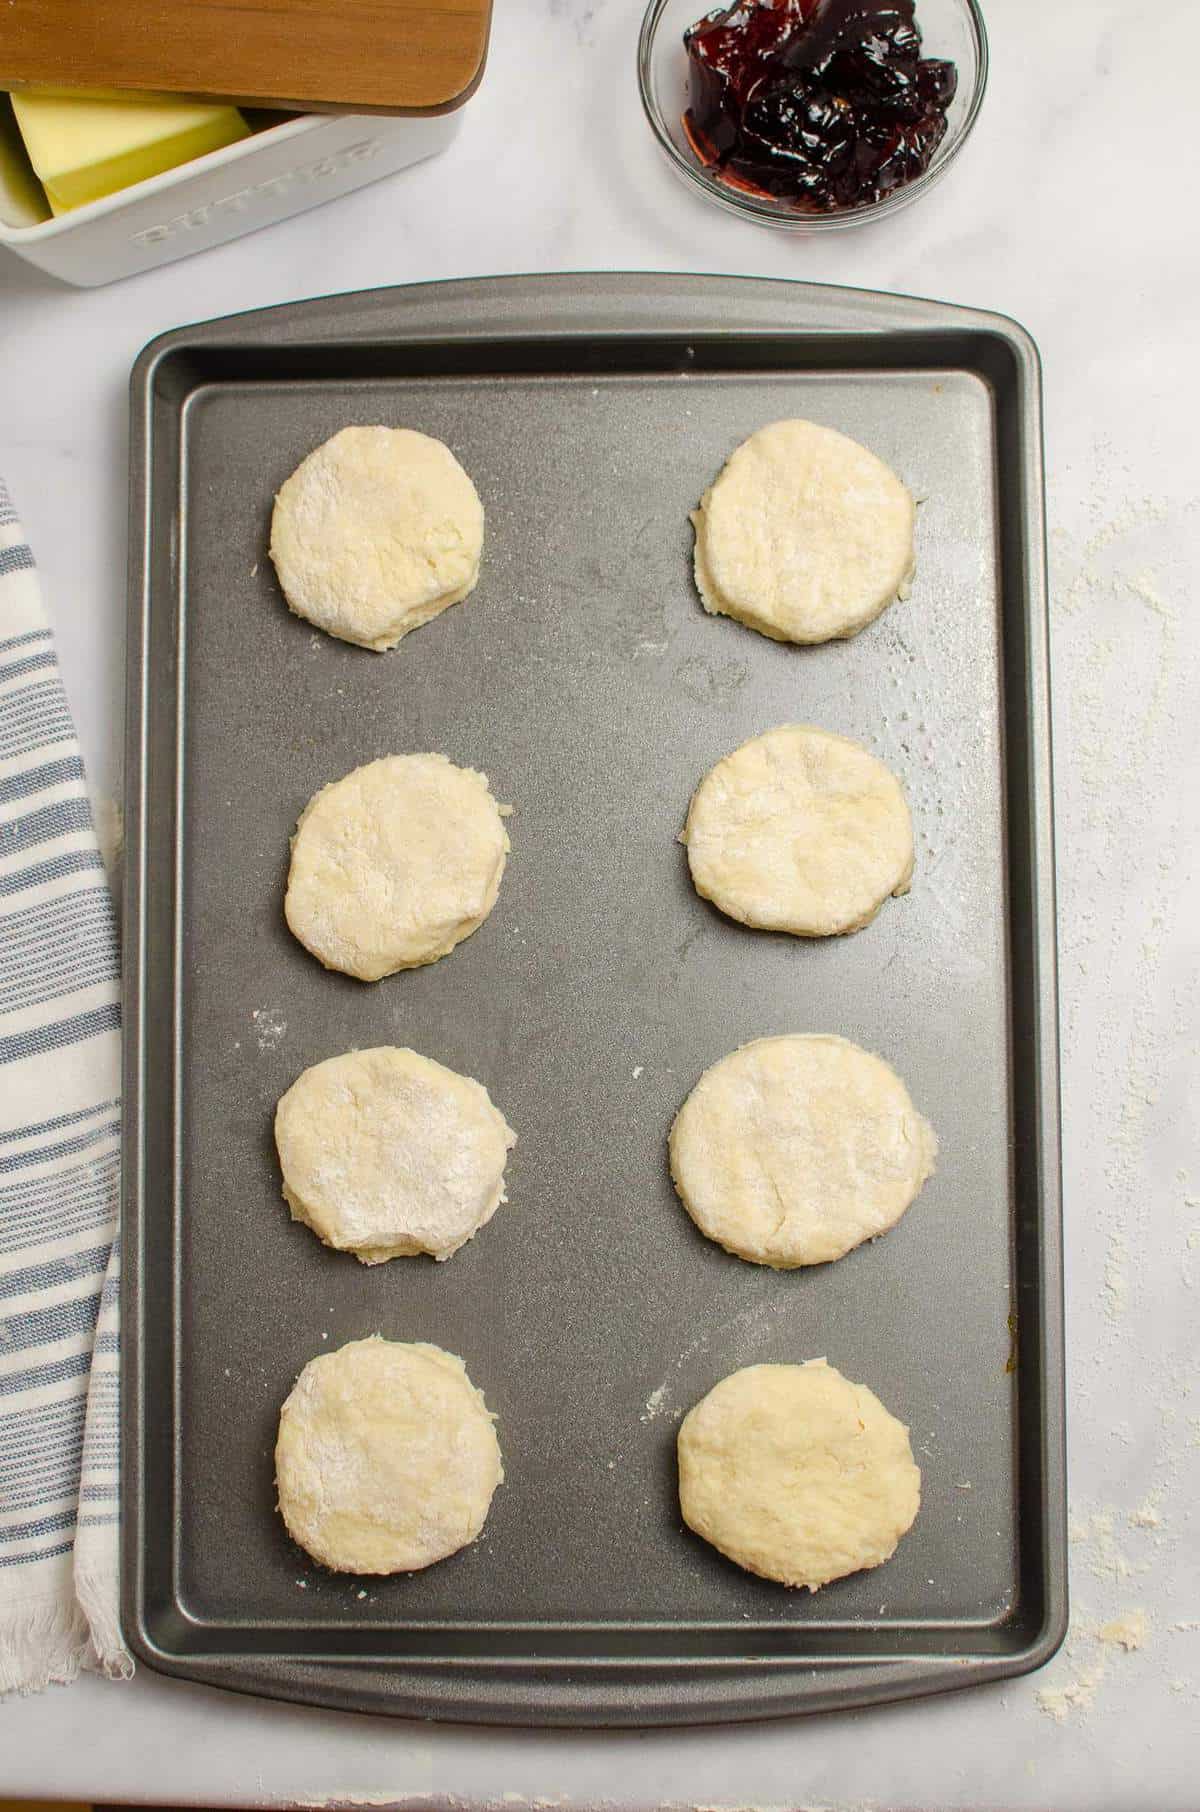 8 unbaked sour cream biscuits on a baking sheet.